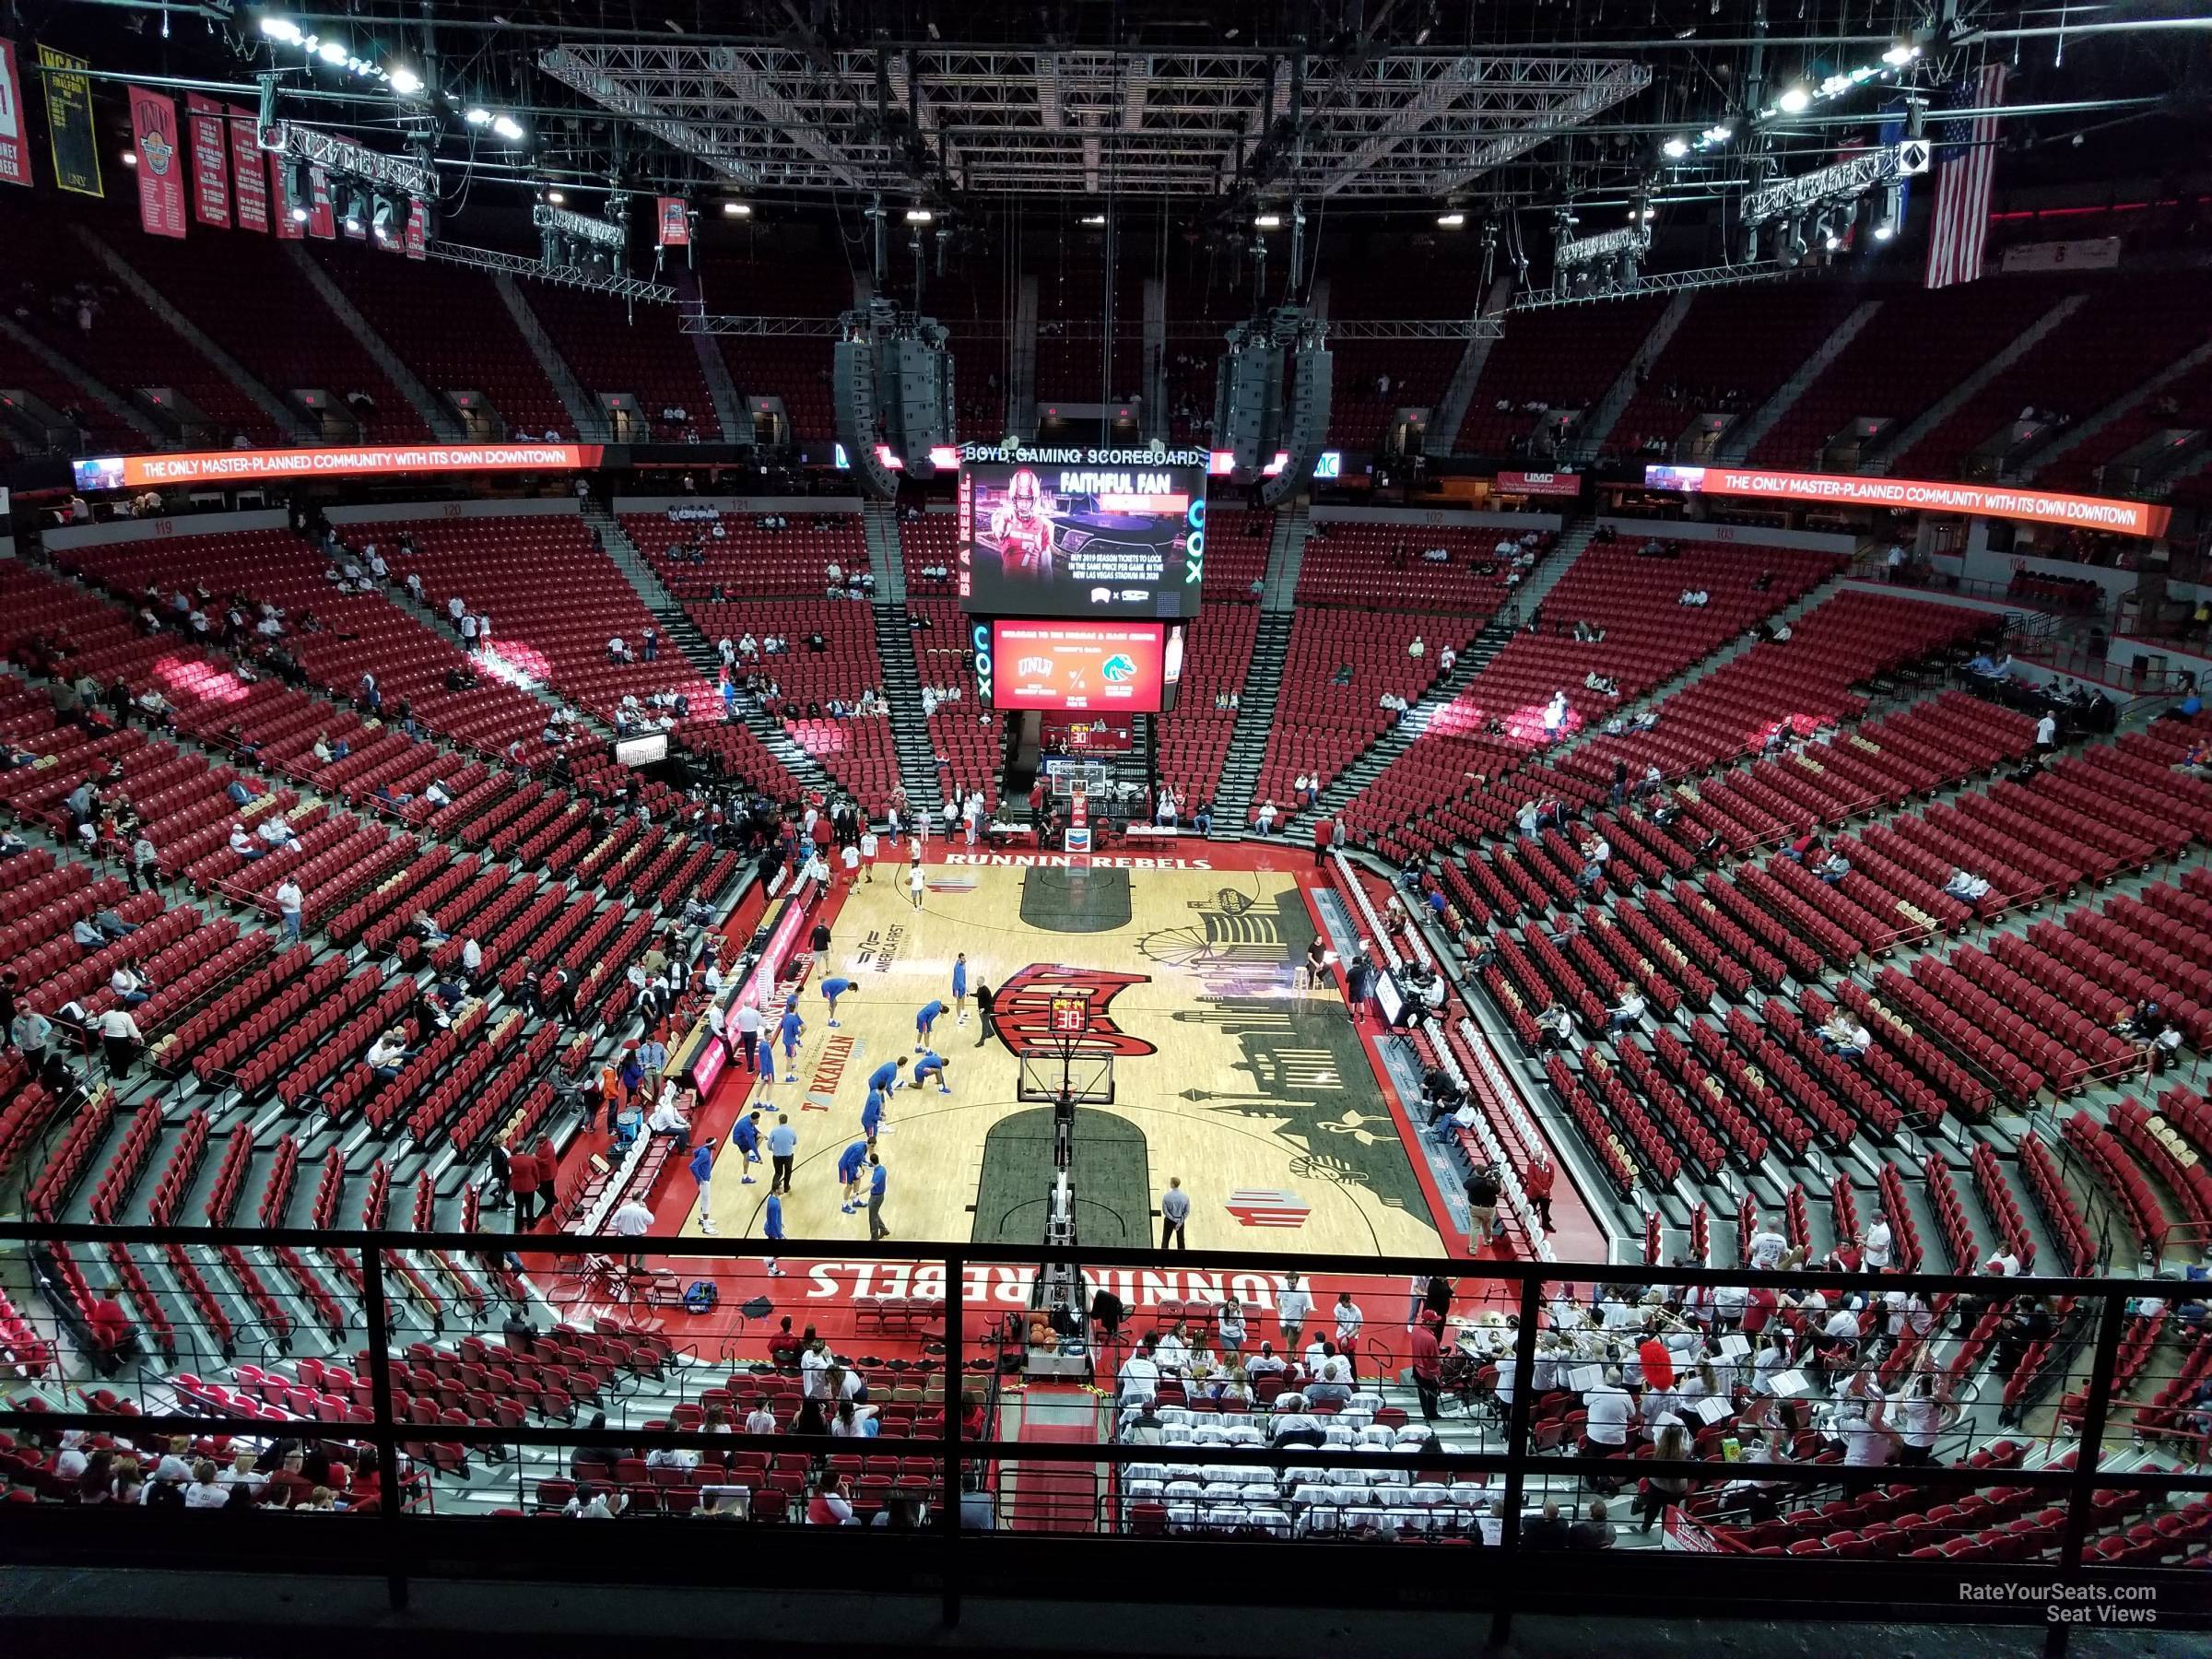 section 218, row e seat view  - thomas and mack center